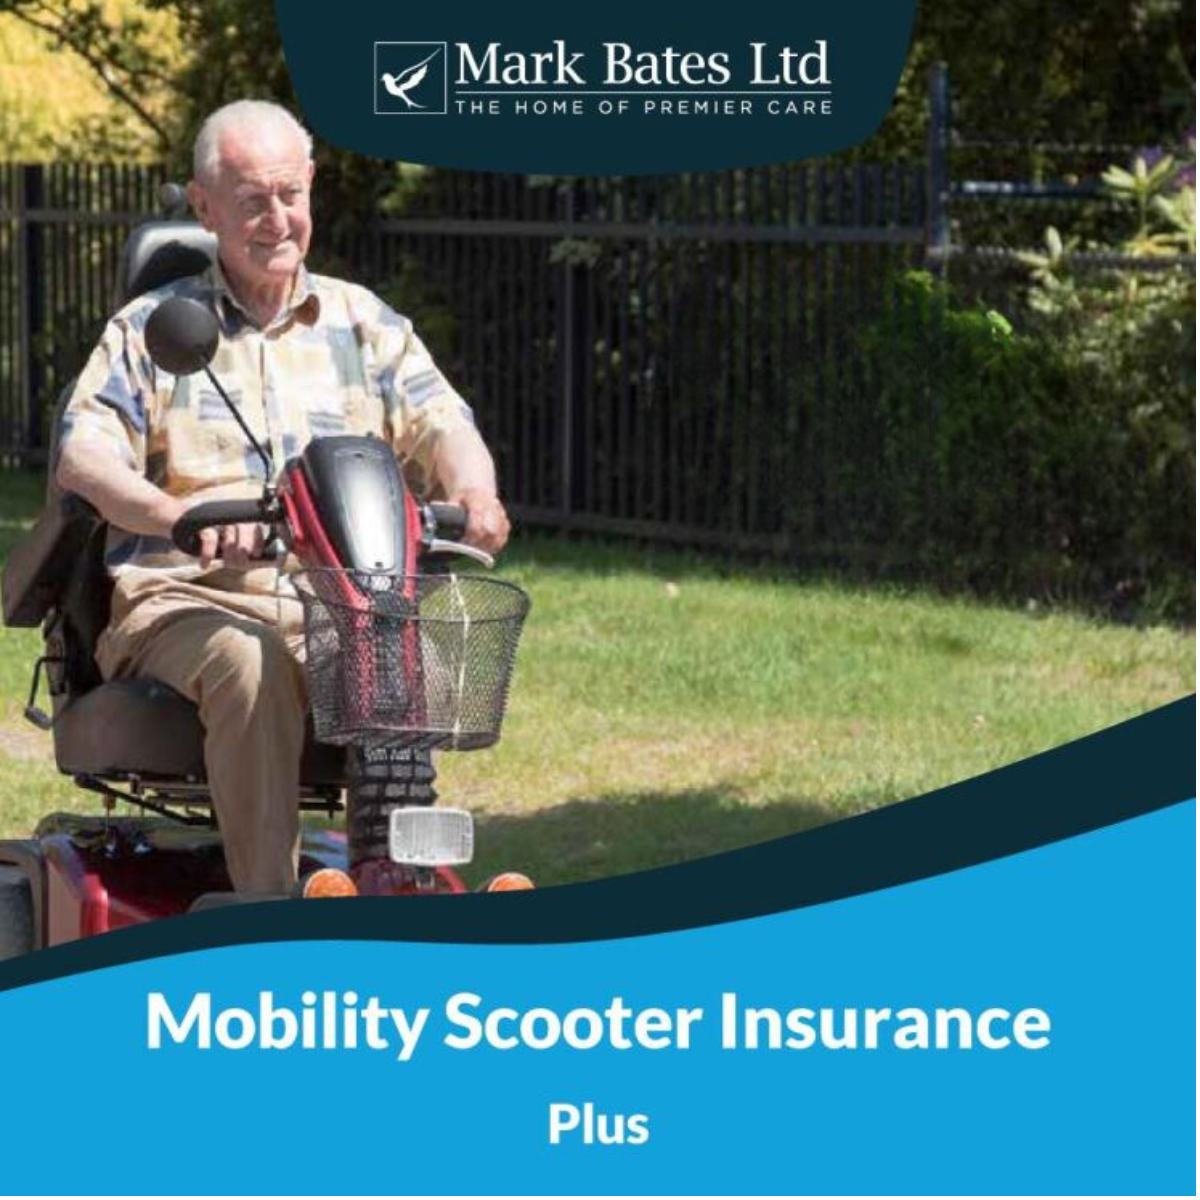 Mobility Scooter Insurance - mobilitybritain.com